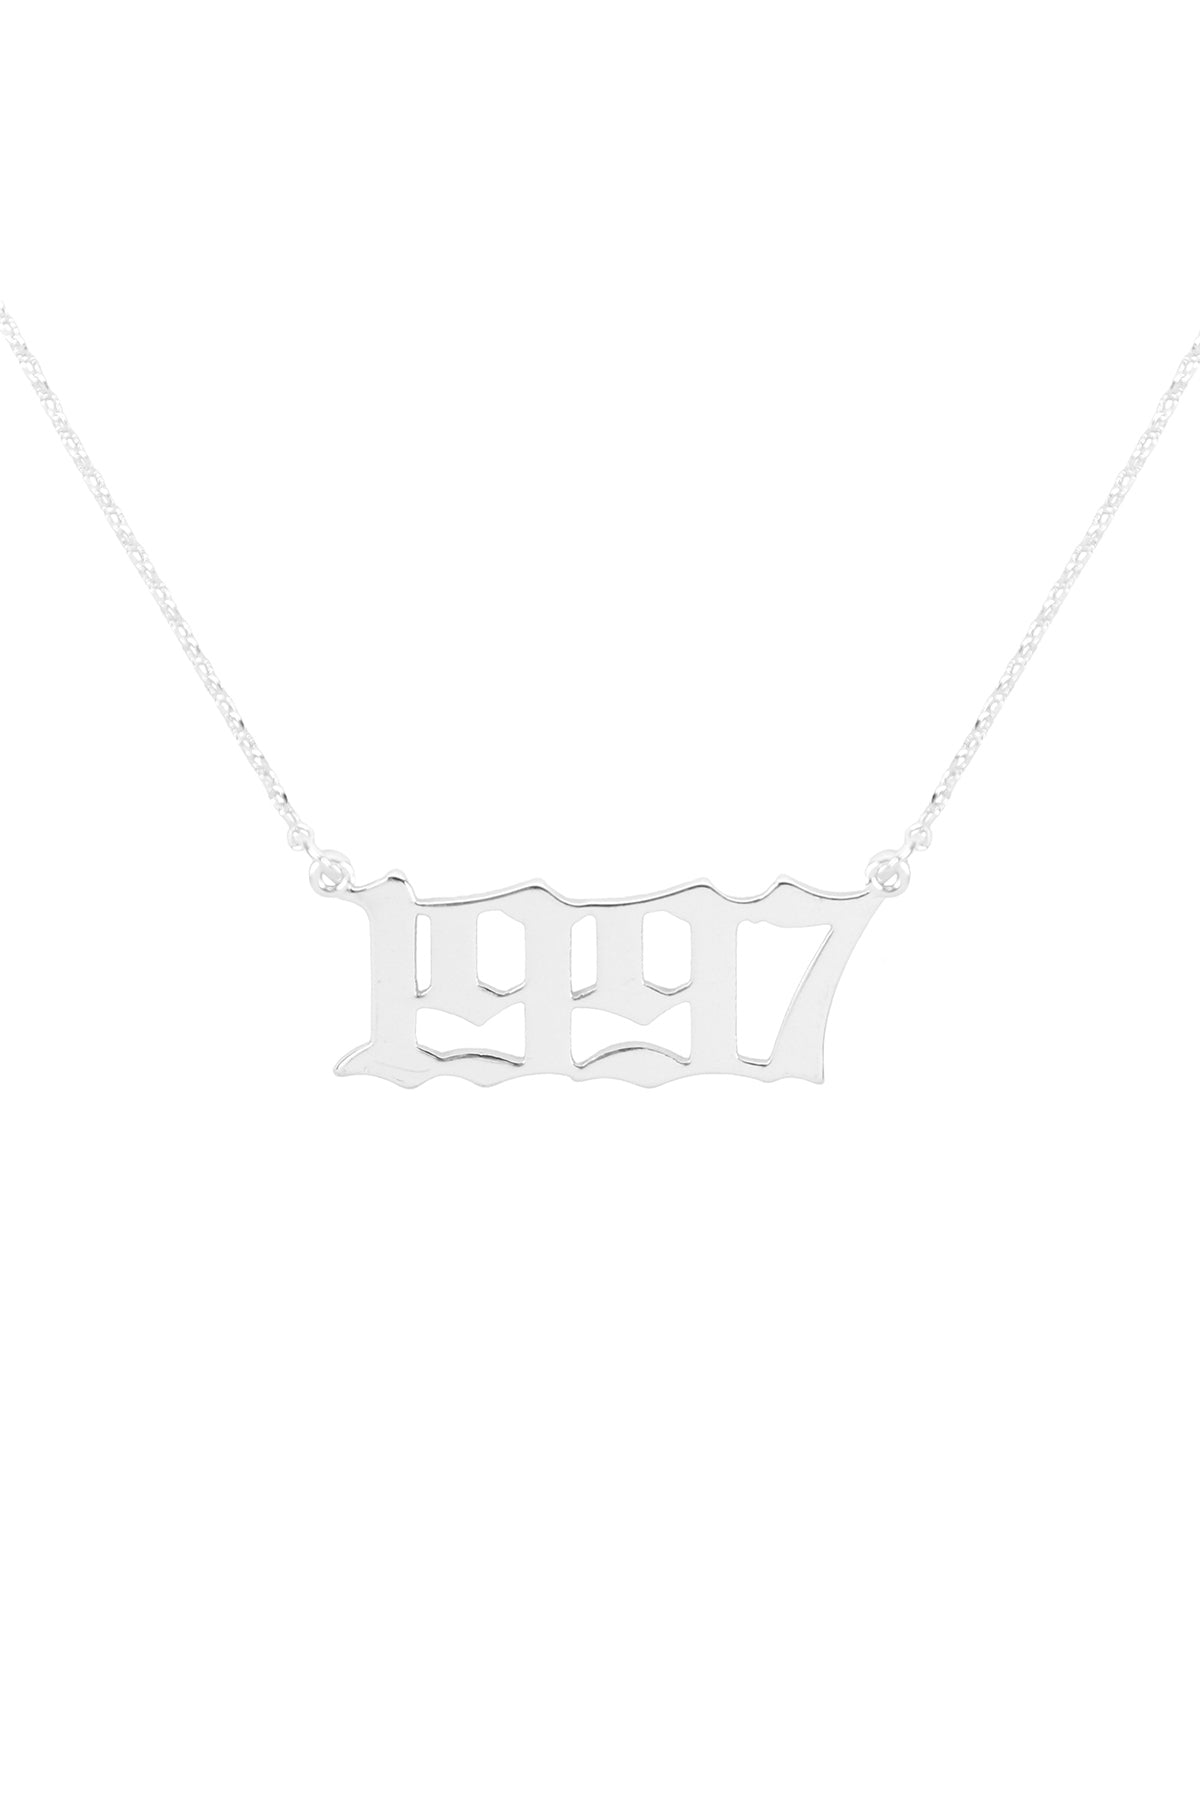 "1997" BIRTH YEAR PERSONALIZED NECKLACE